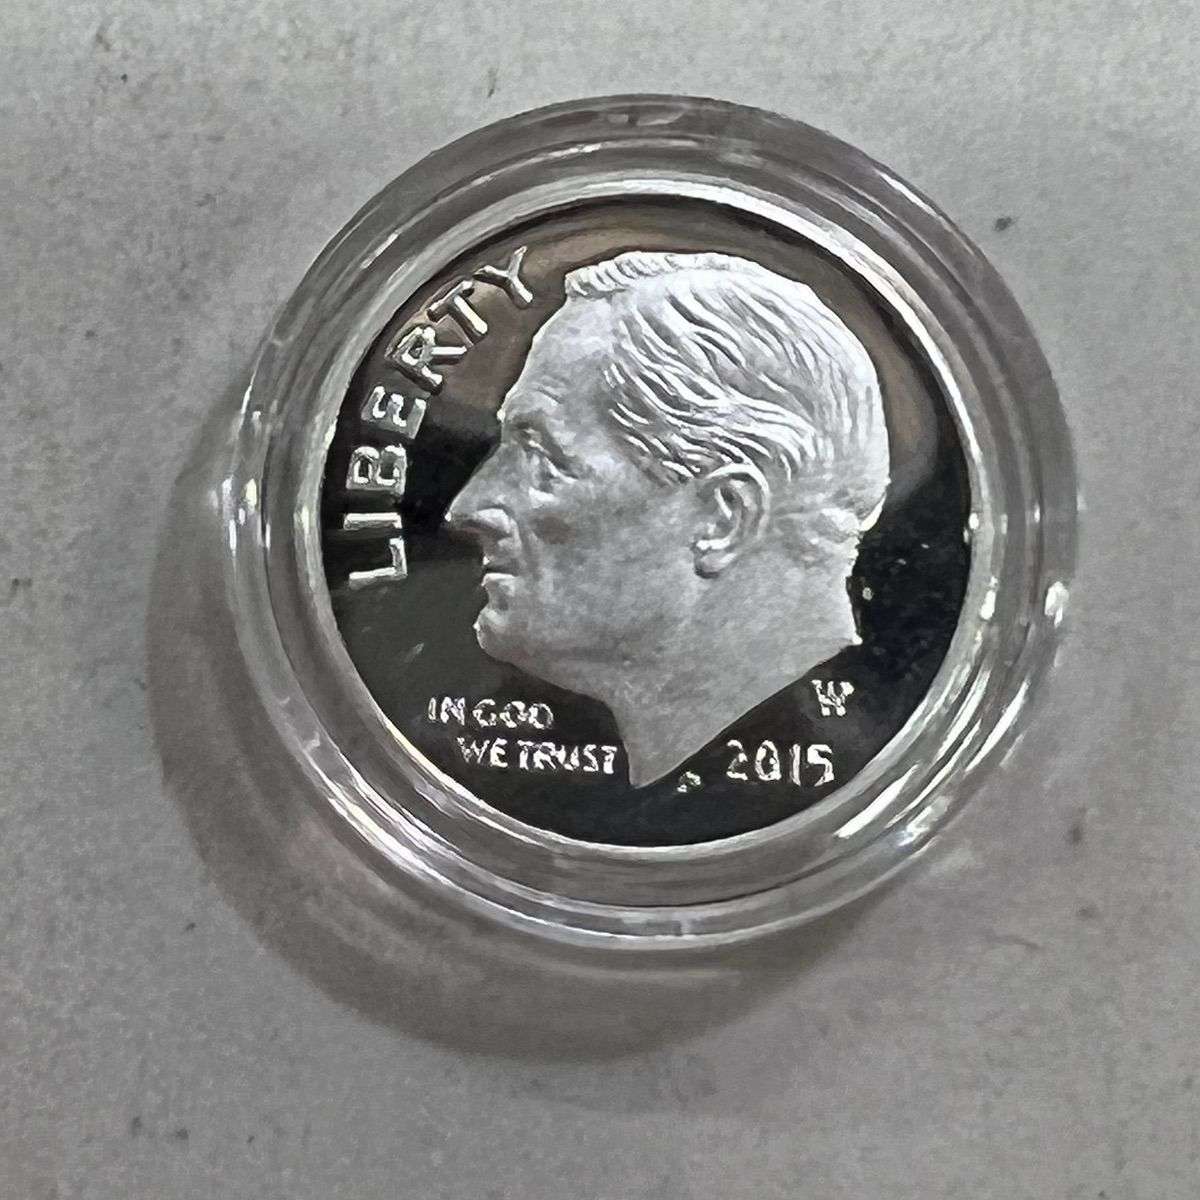 $1 Special Edition Proof Silver Dollar Coin 2019 Louis Riel Father of Manitoba 